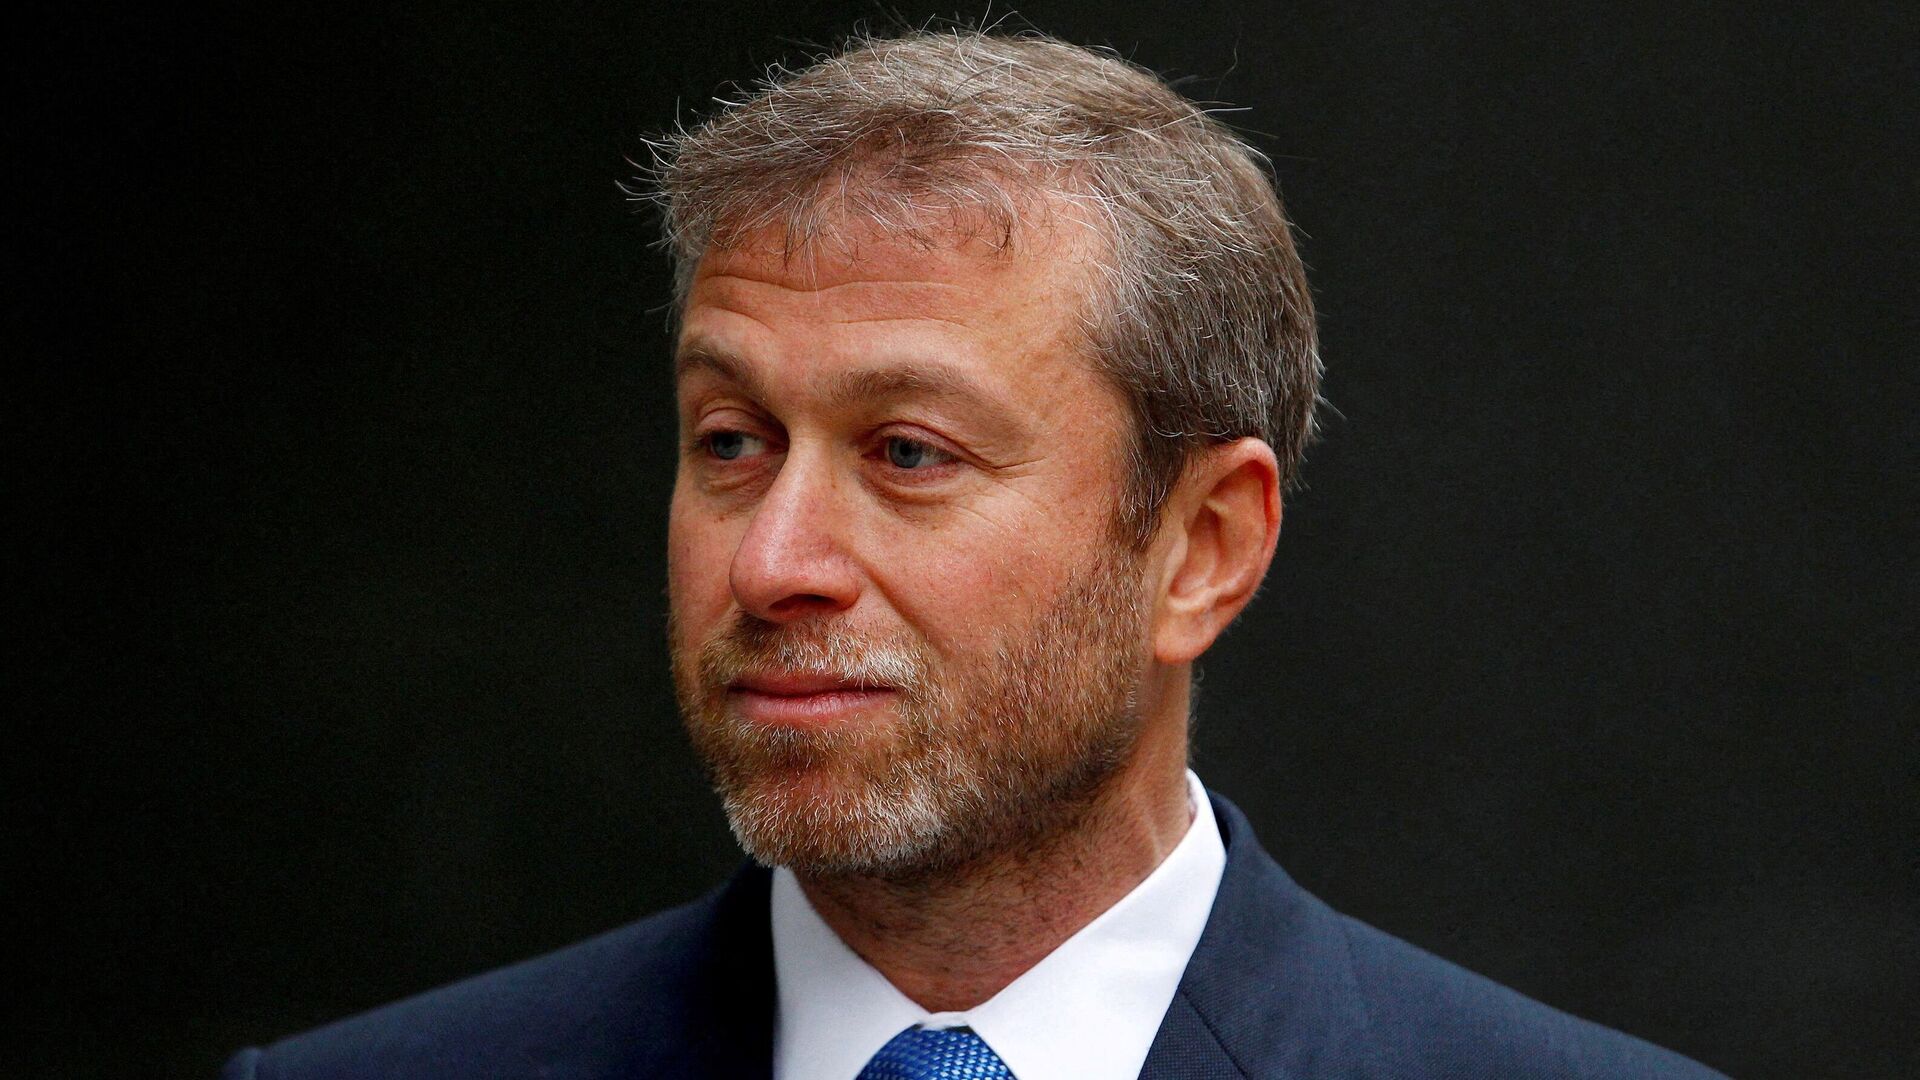 Russian billionaire and owner of Chelsea football club Roman Abramovich arrives at a division of the High Court in central London October 31, 2011 - Sputnik International, 1920, 29.03.2022